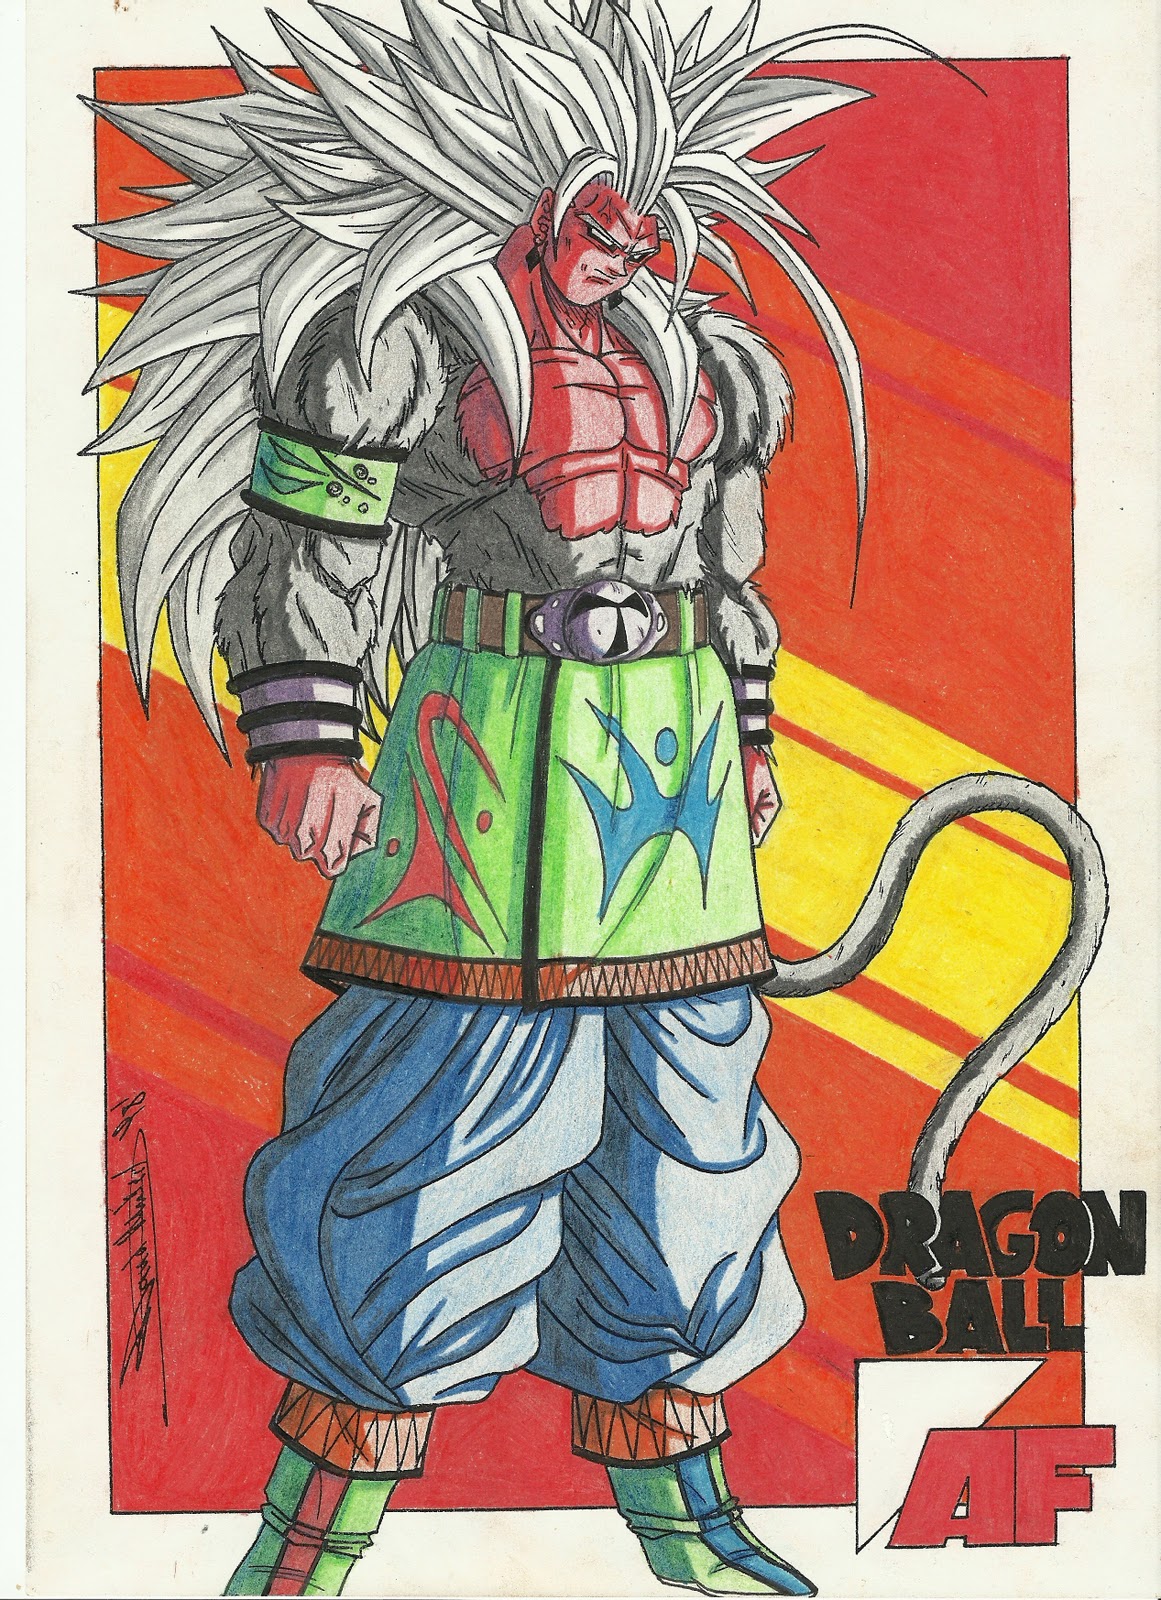 Dragon Ball AF - After The Future: February 2012